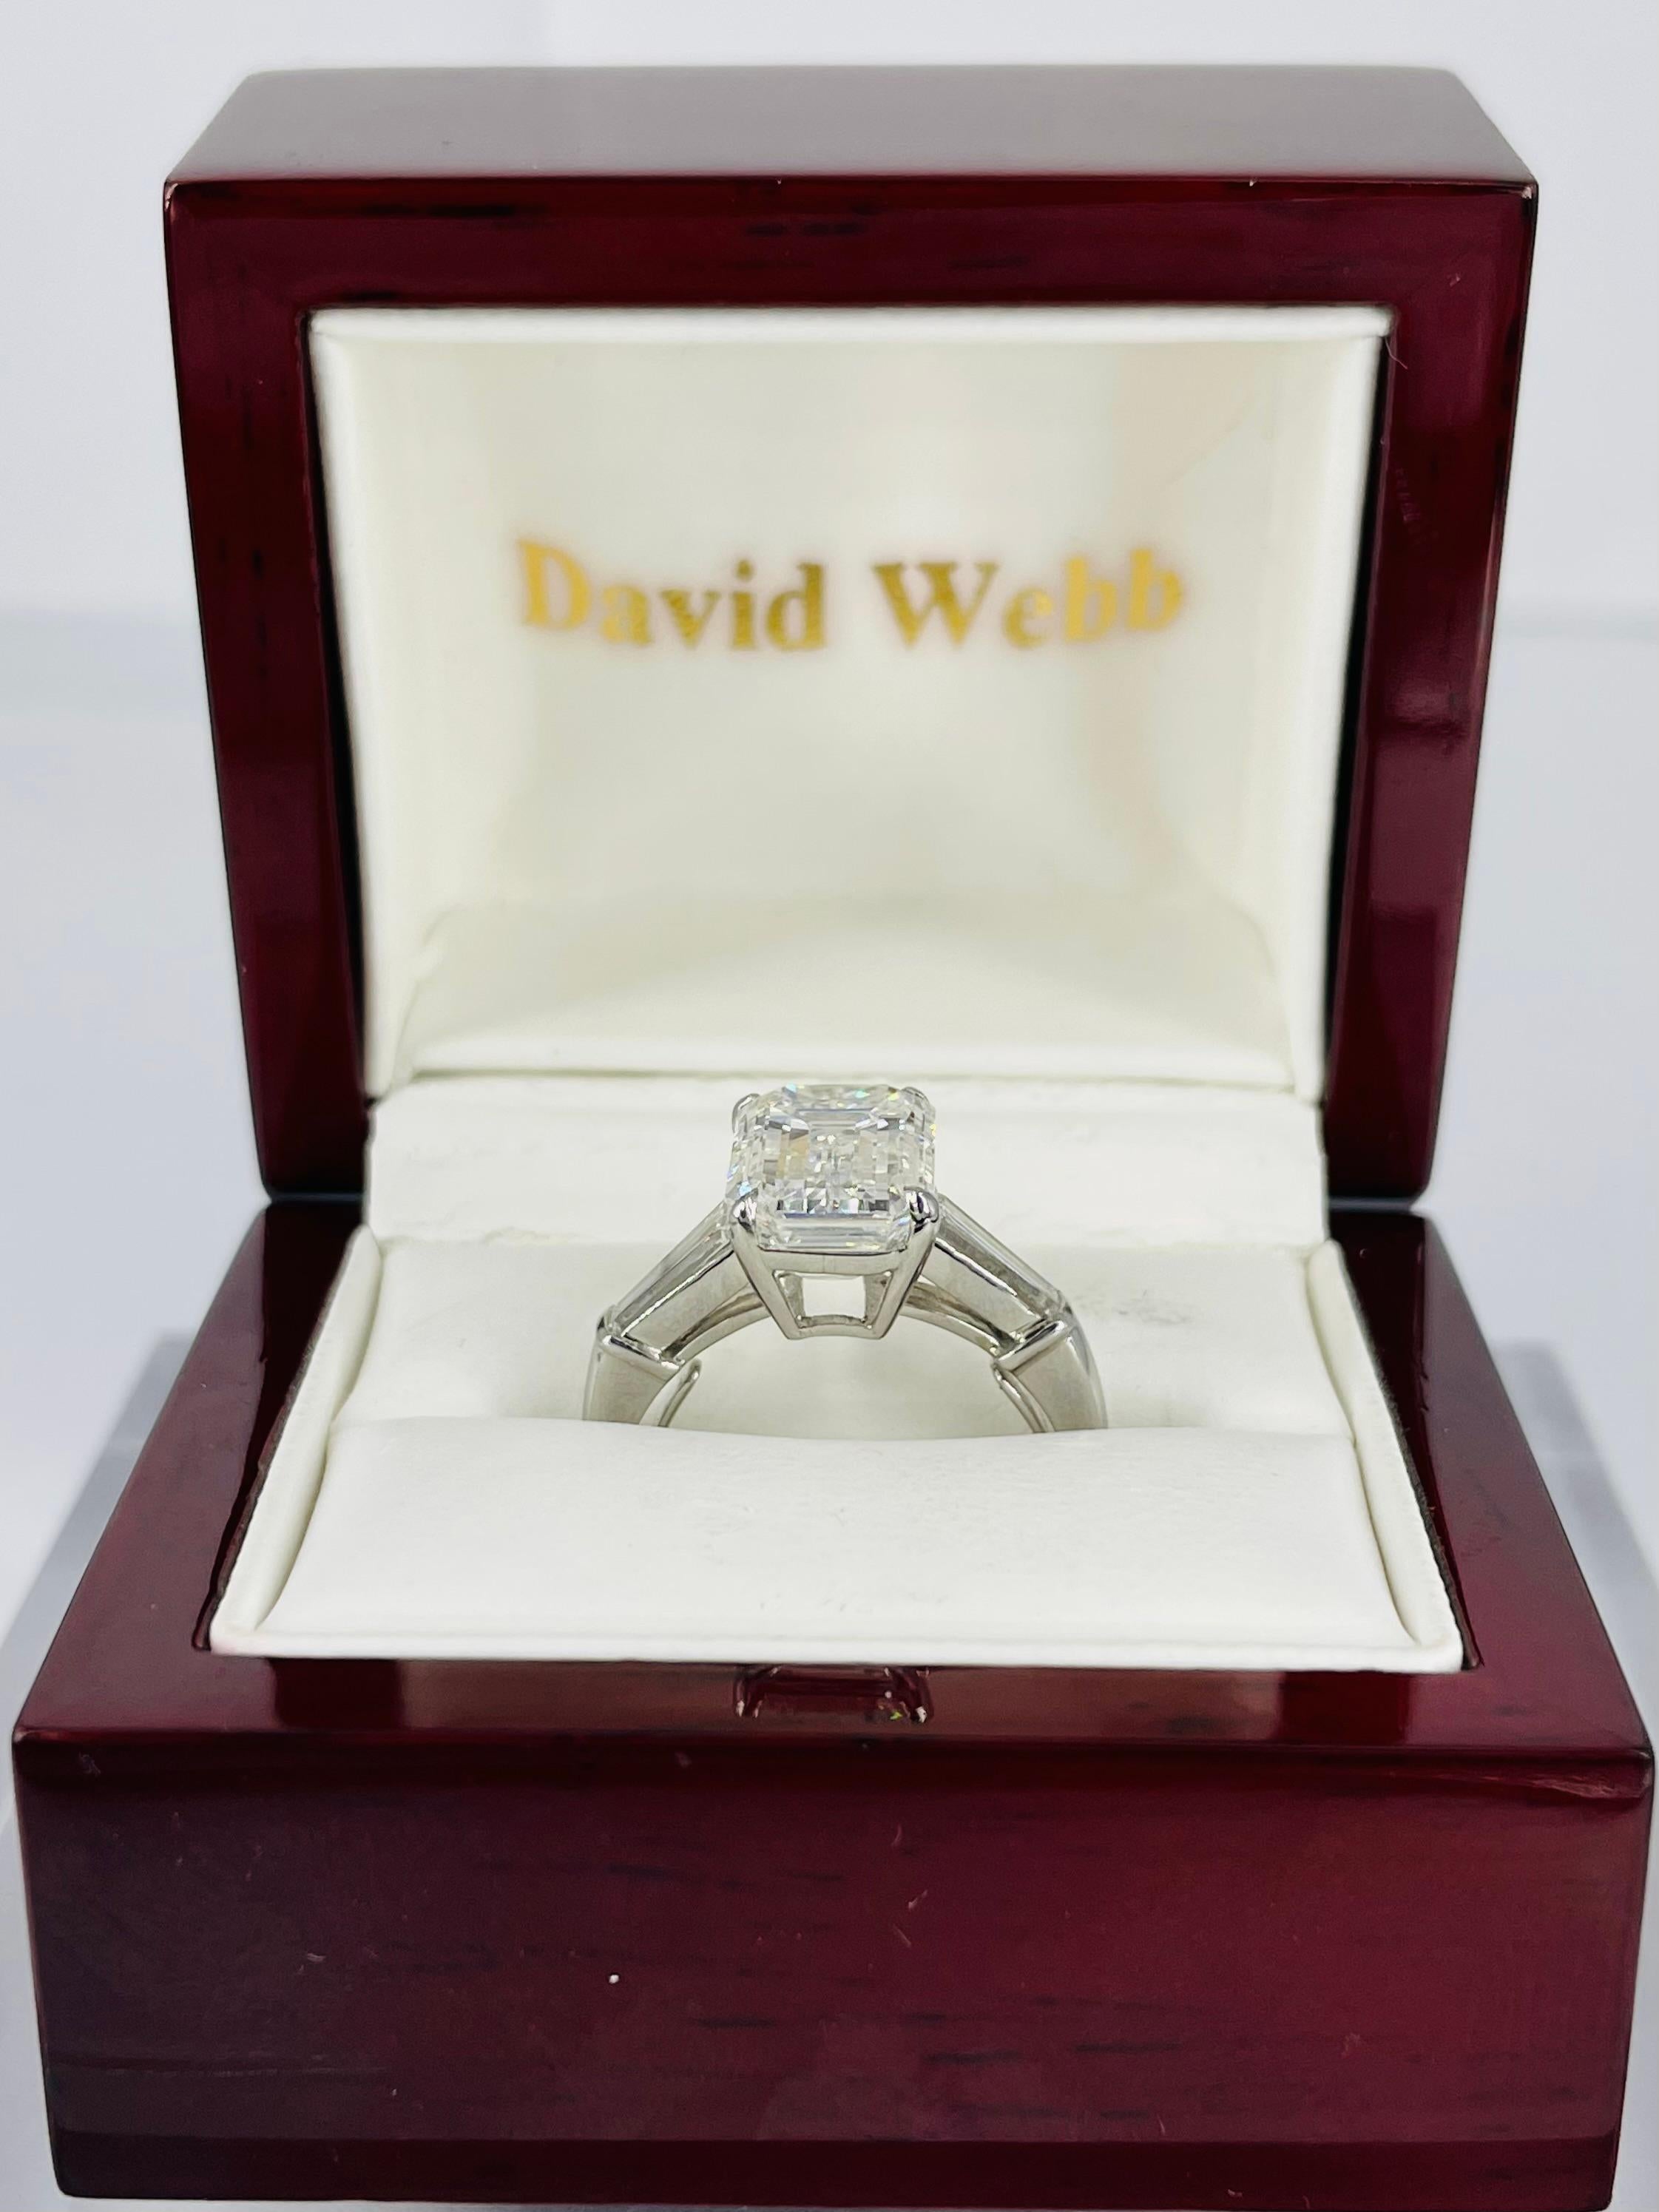 Women's David Webb 5.01 ct GIA FVS1 Emerald Cut Diamond Ring with Tapered Baguettes For Sale